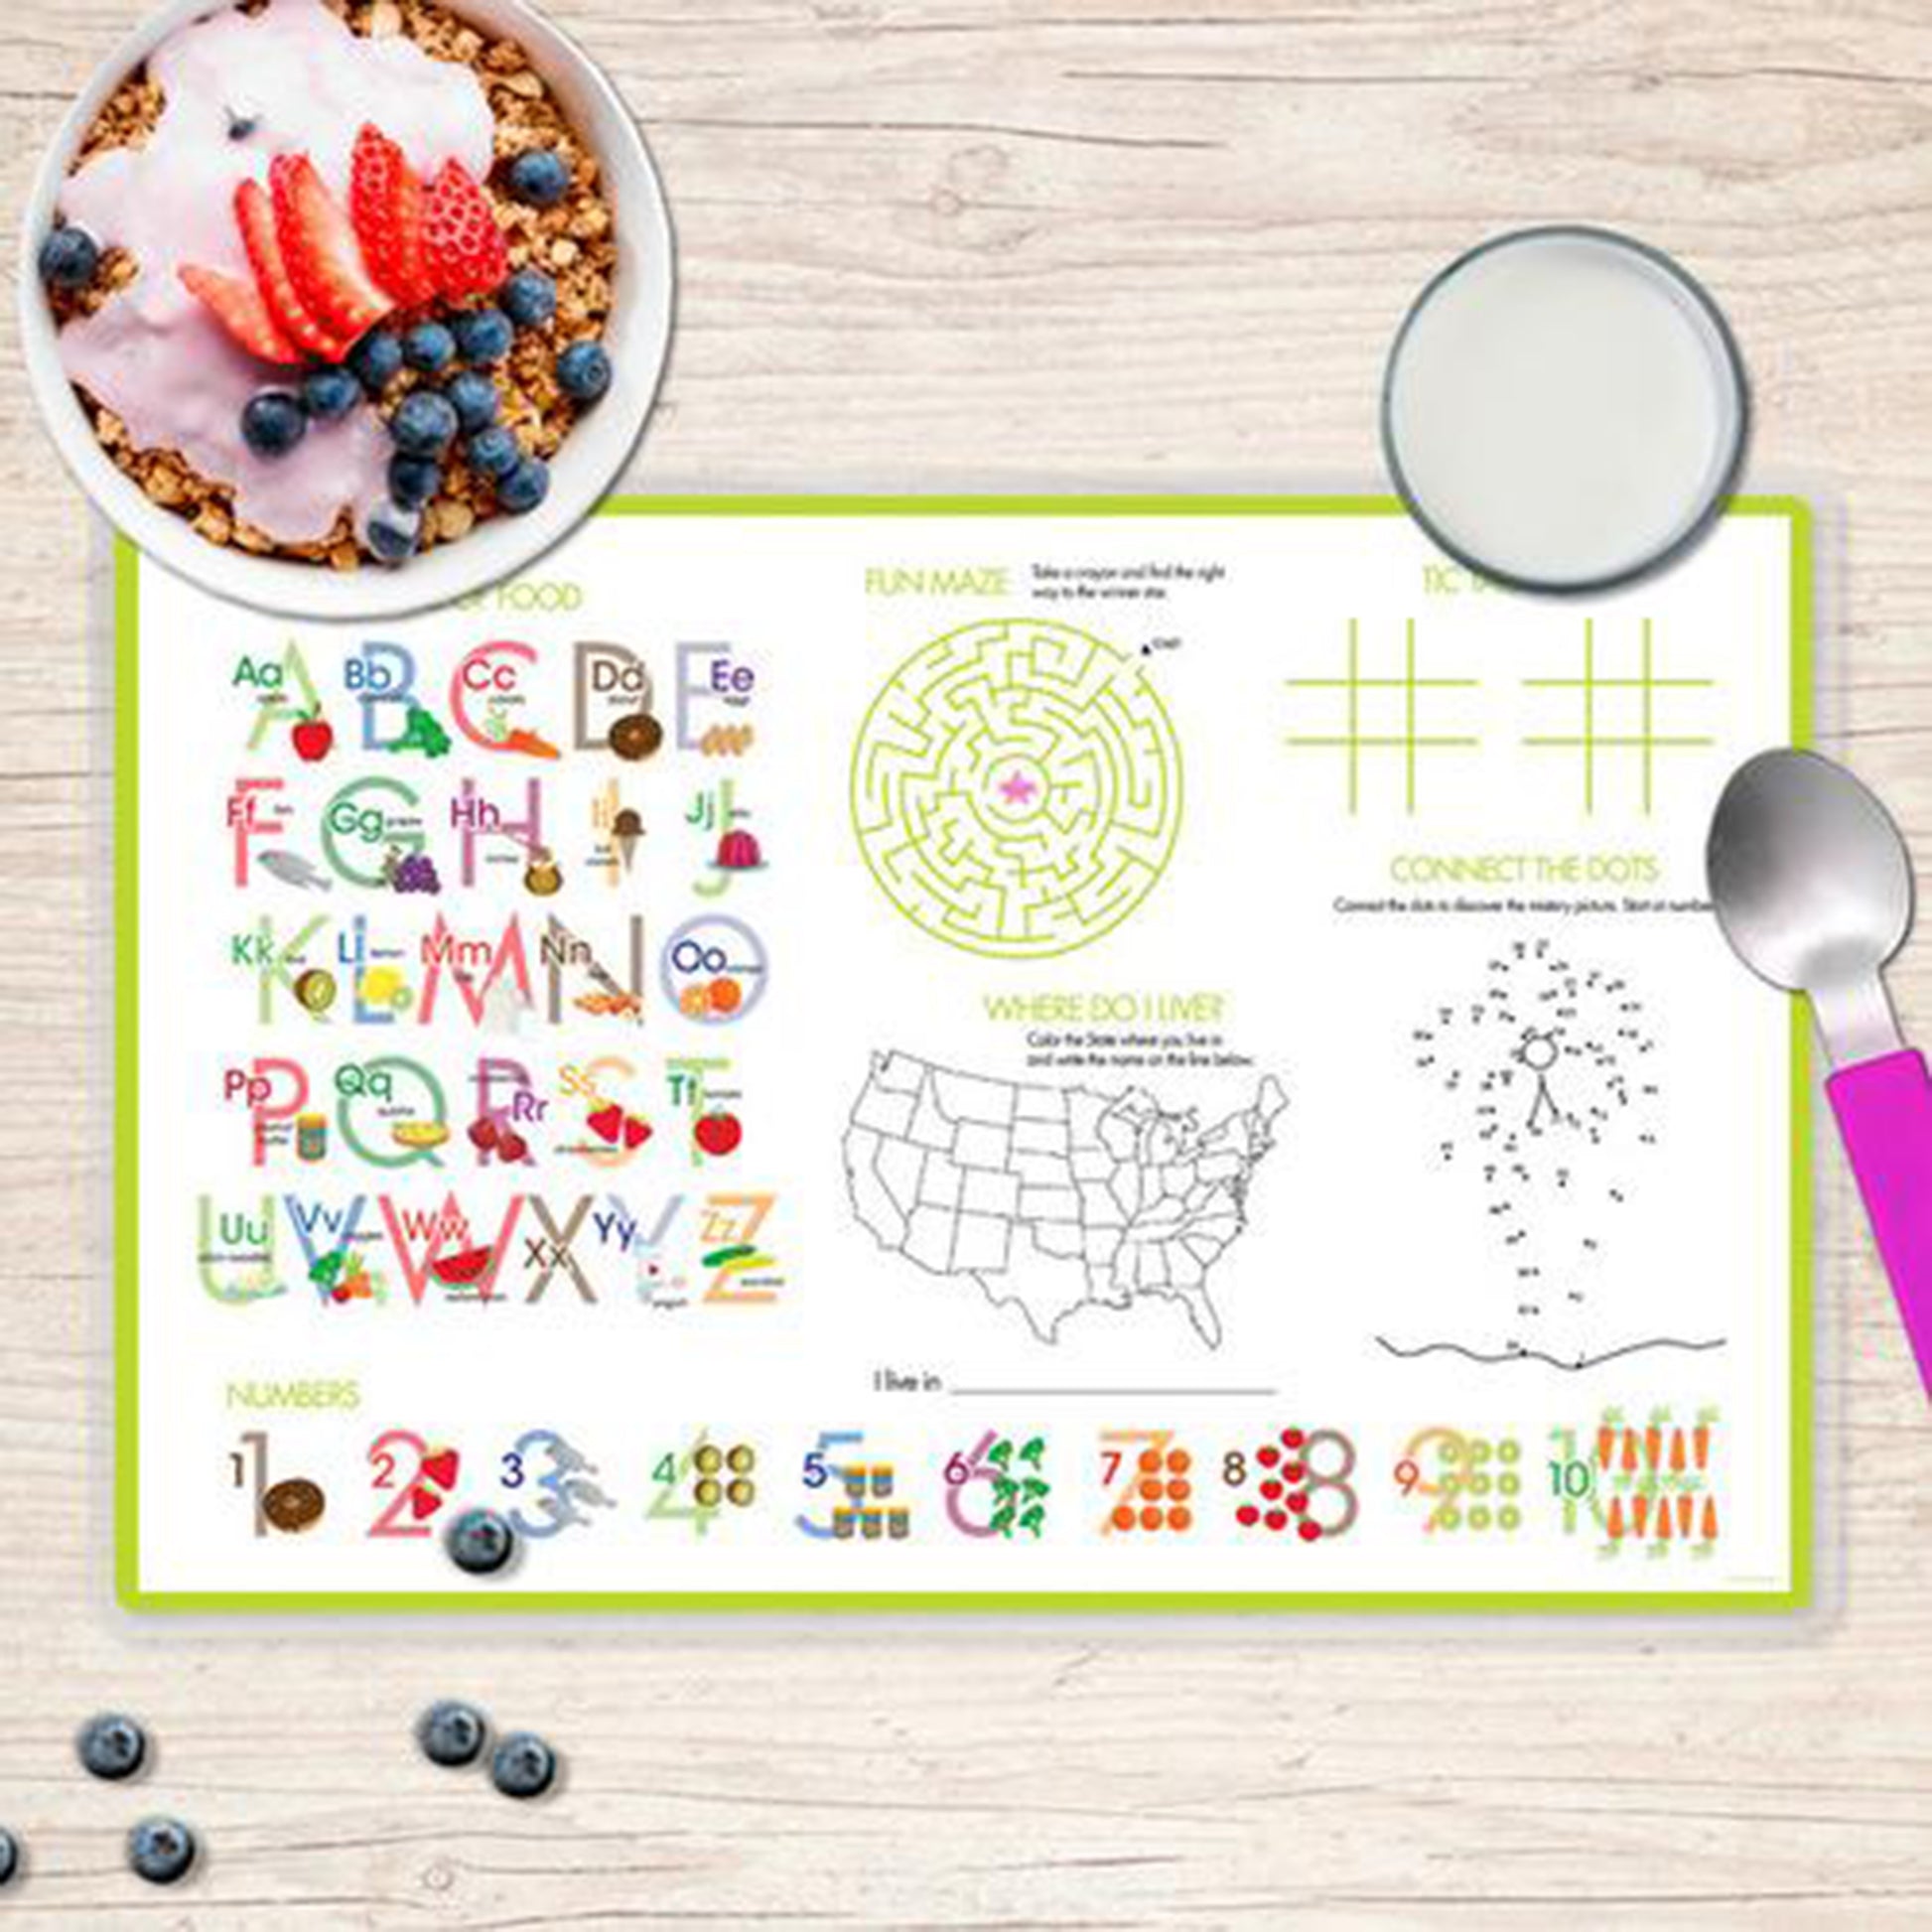 A Daisy for You Personalized Kids Placemat - Give Wink